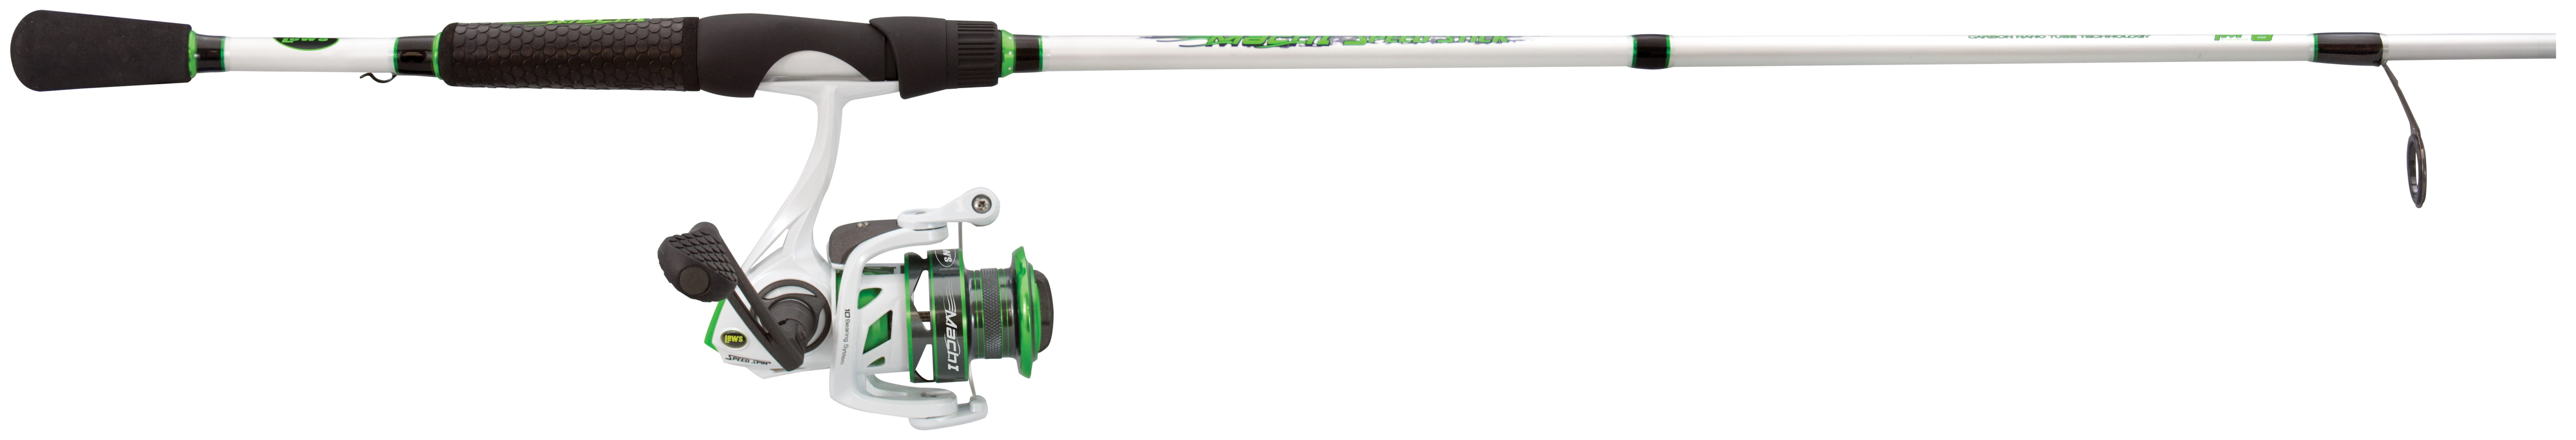 Lew's Mach1 6' 9 Medium Light Spinning Rod and Reel Fishing Combo